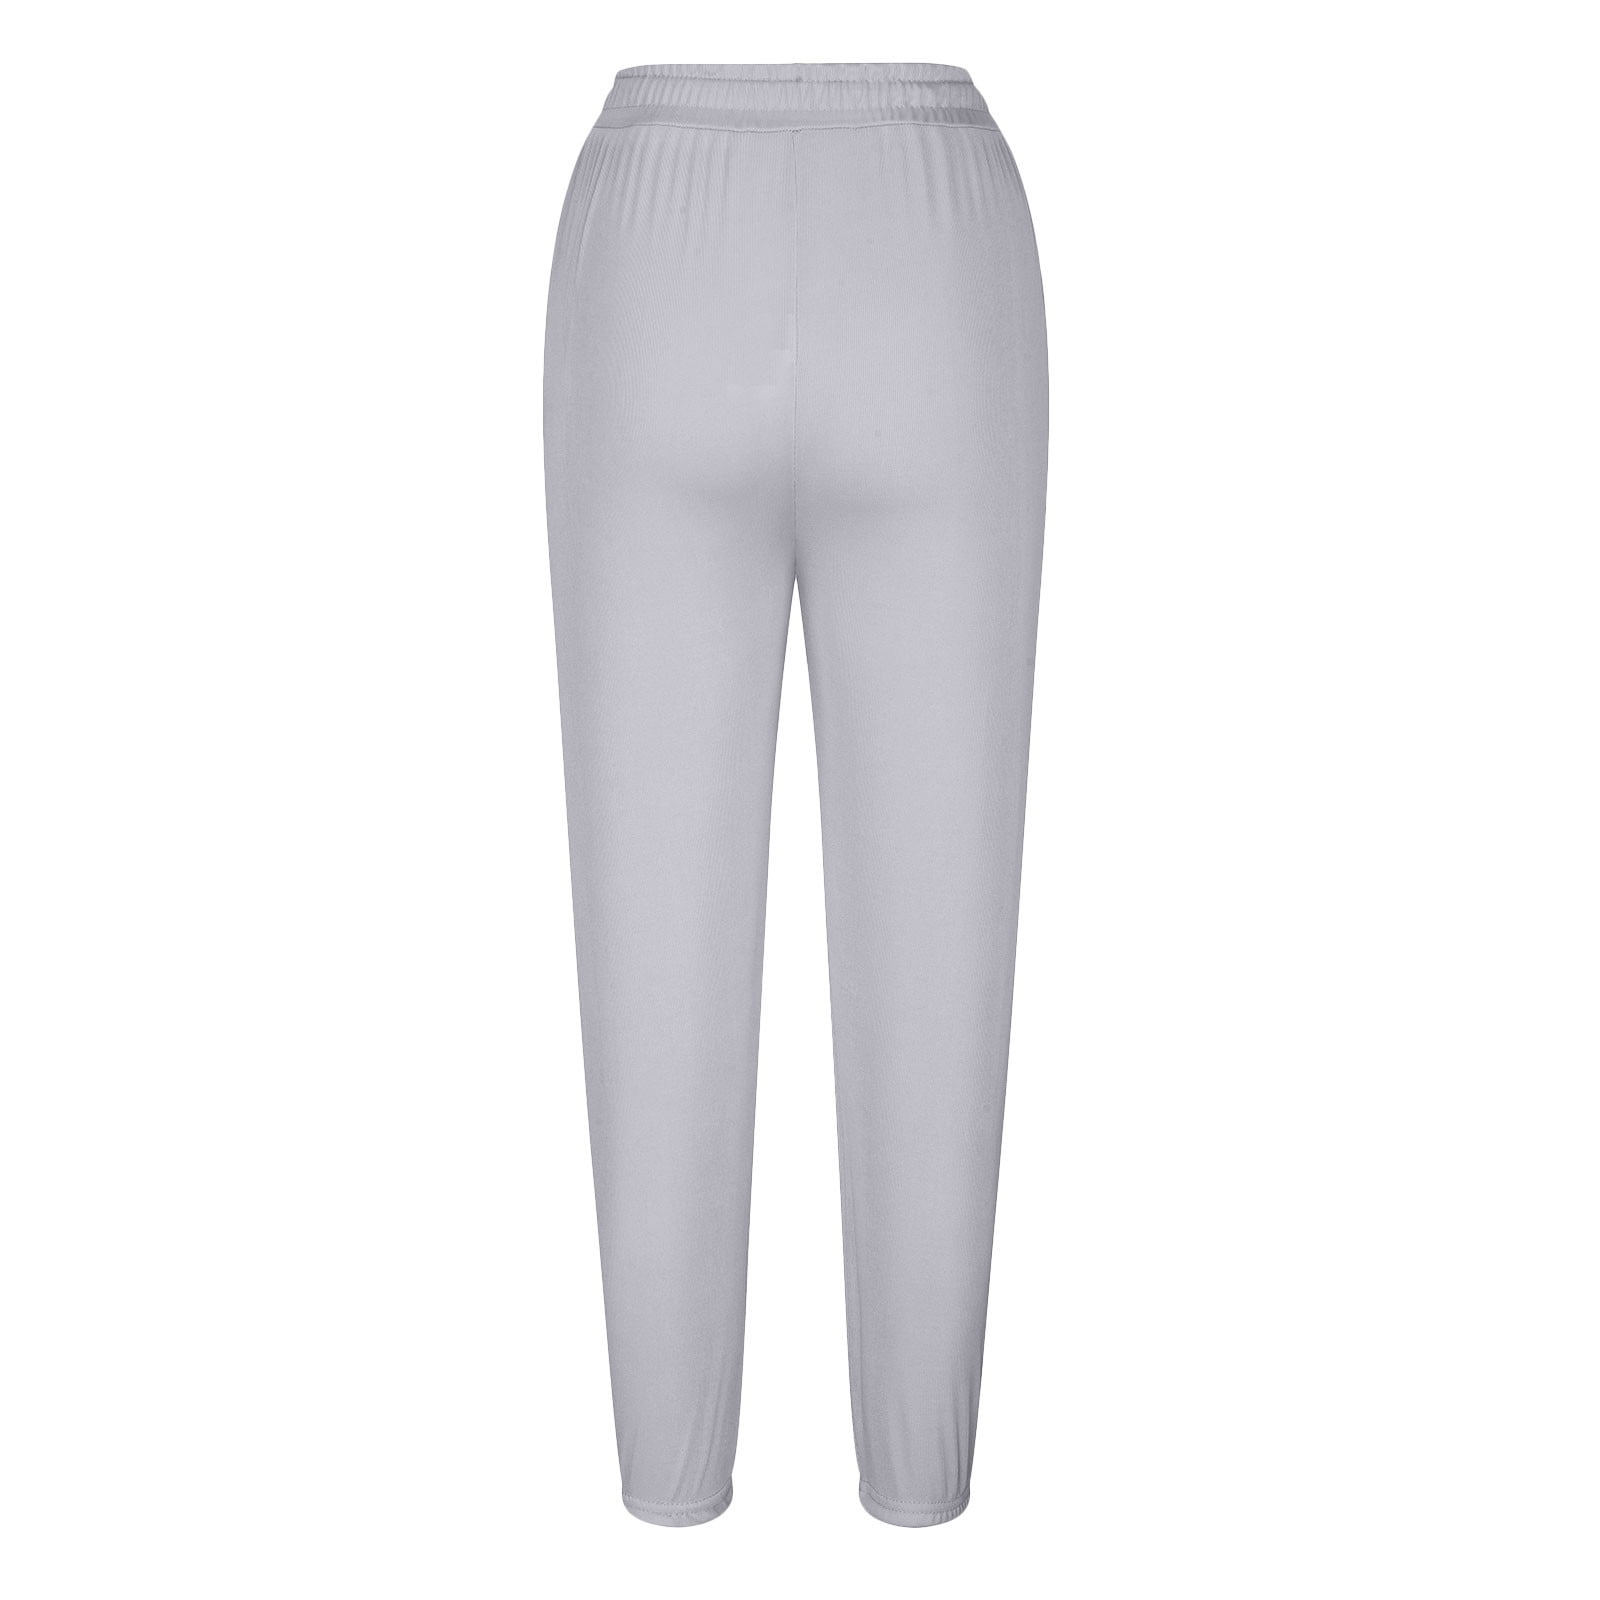 4 Pcs/lot High-end Ladies Ice Silk Seamless Safety Pants Summer